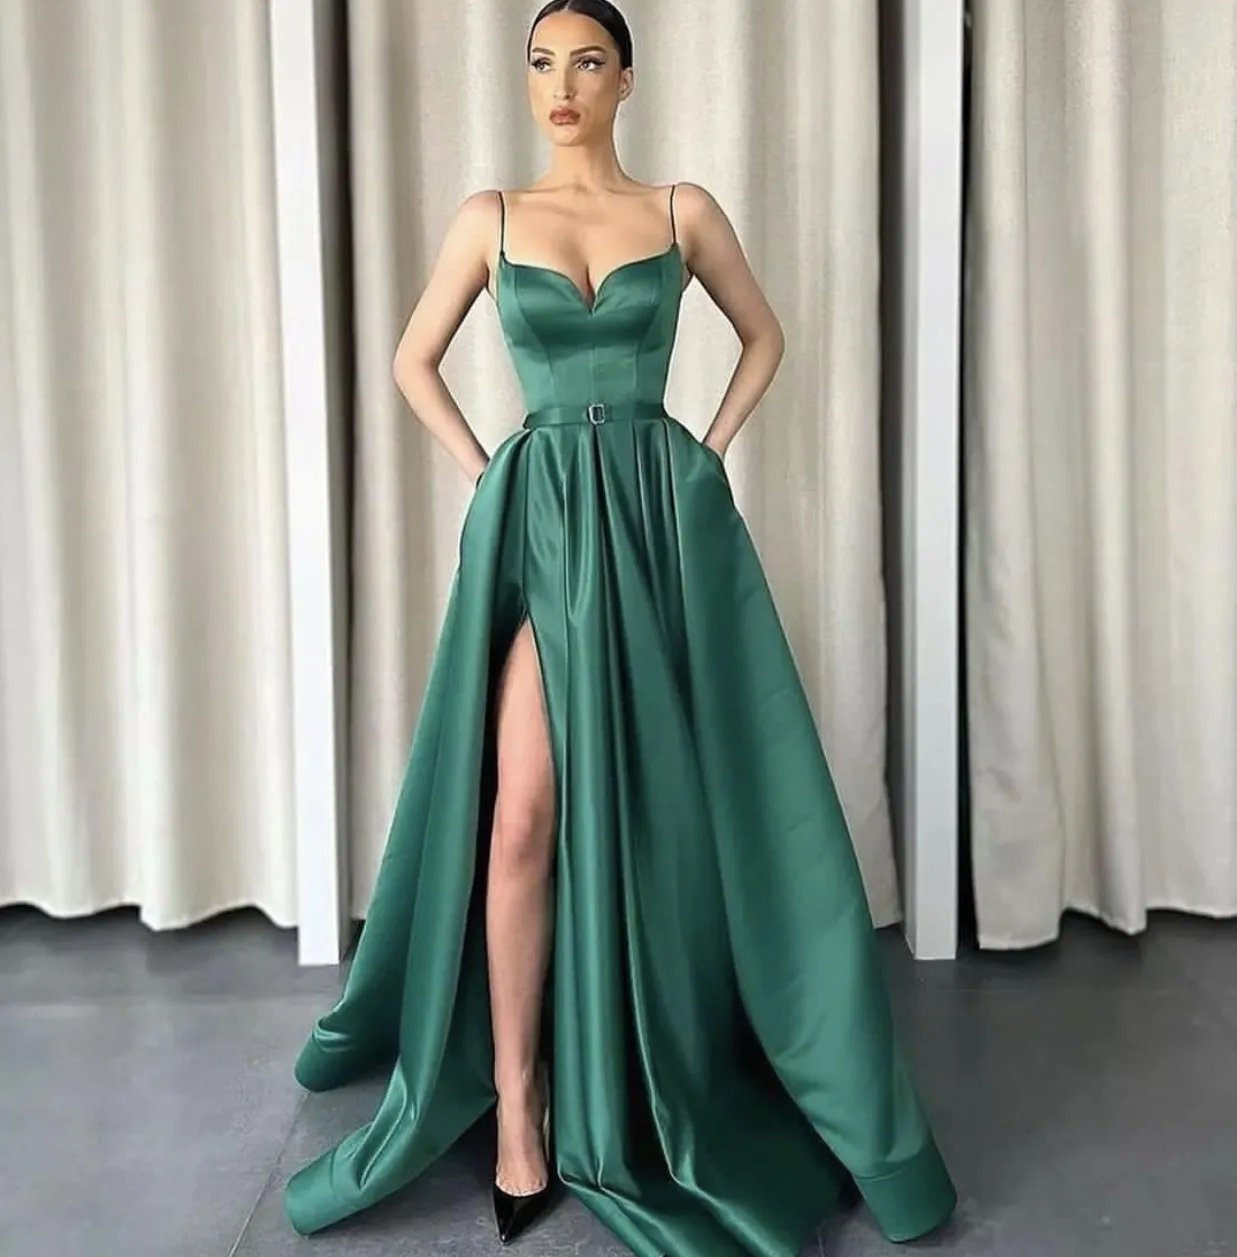 Green Bridesmaid Dresses Wedding Party Guest Gowns A Line Junior Maid ...